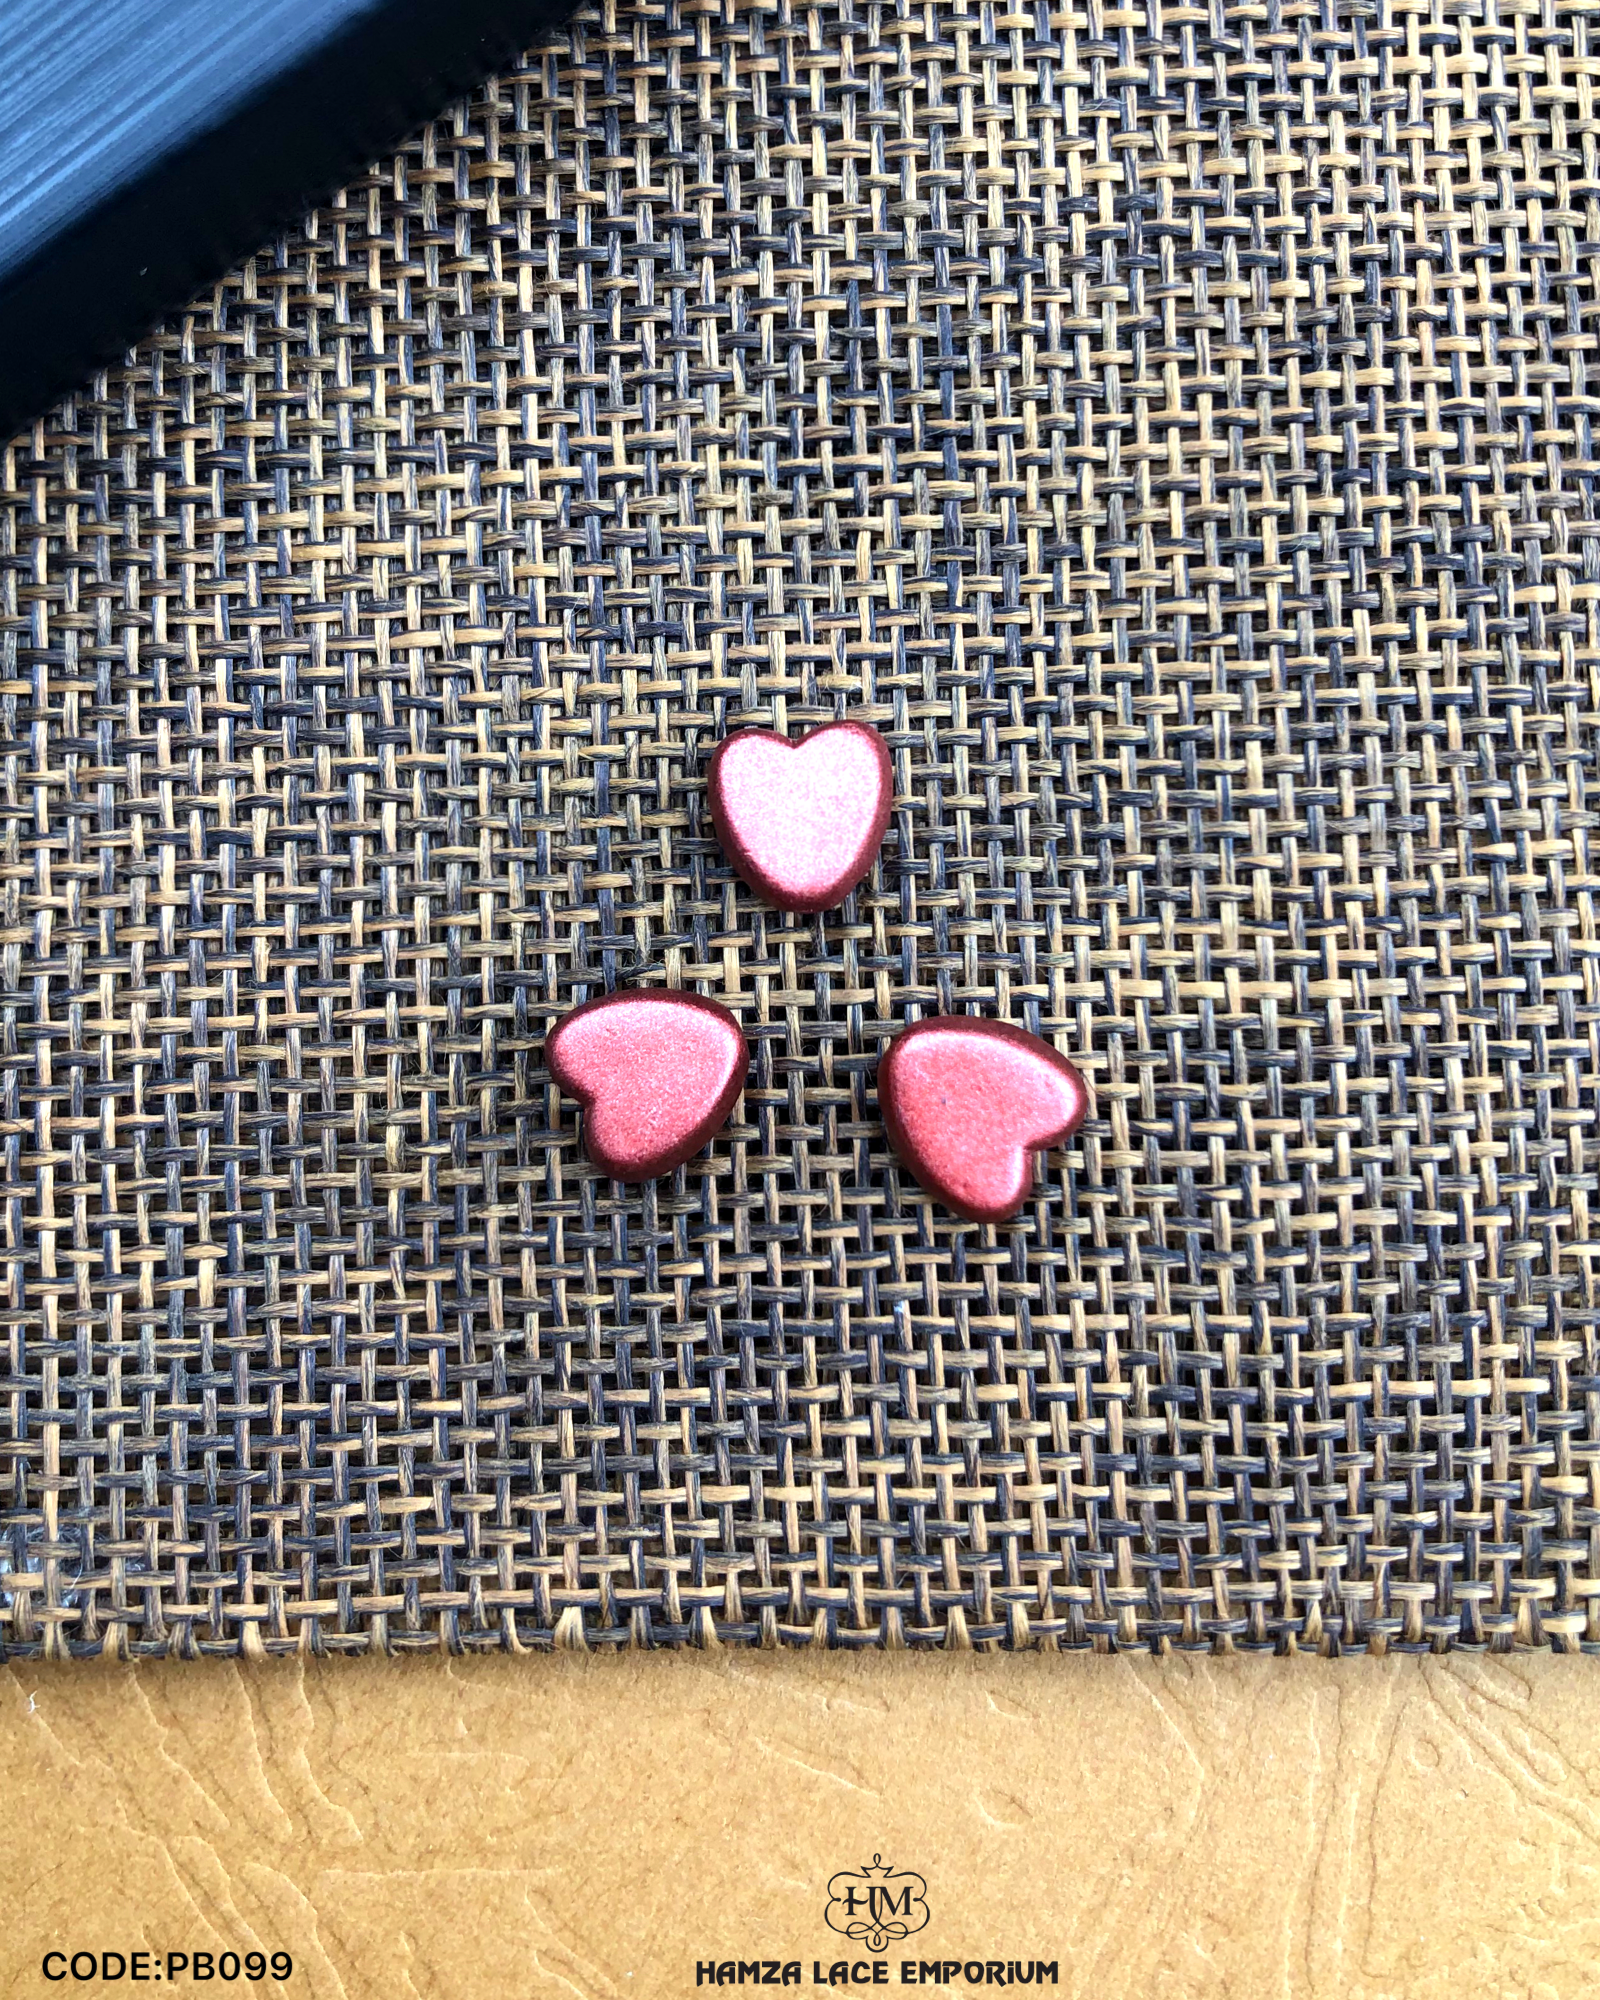 'Heart Shape Accessory PB099' - suitable for fashion and decorative purposes